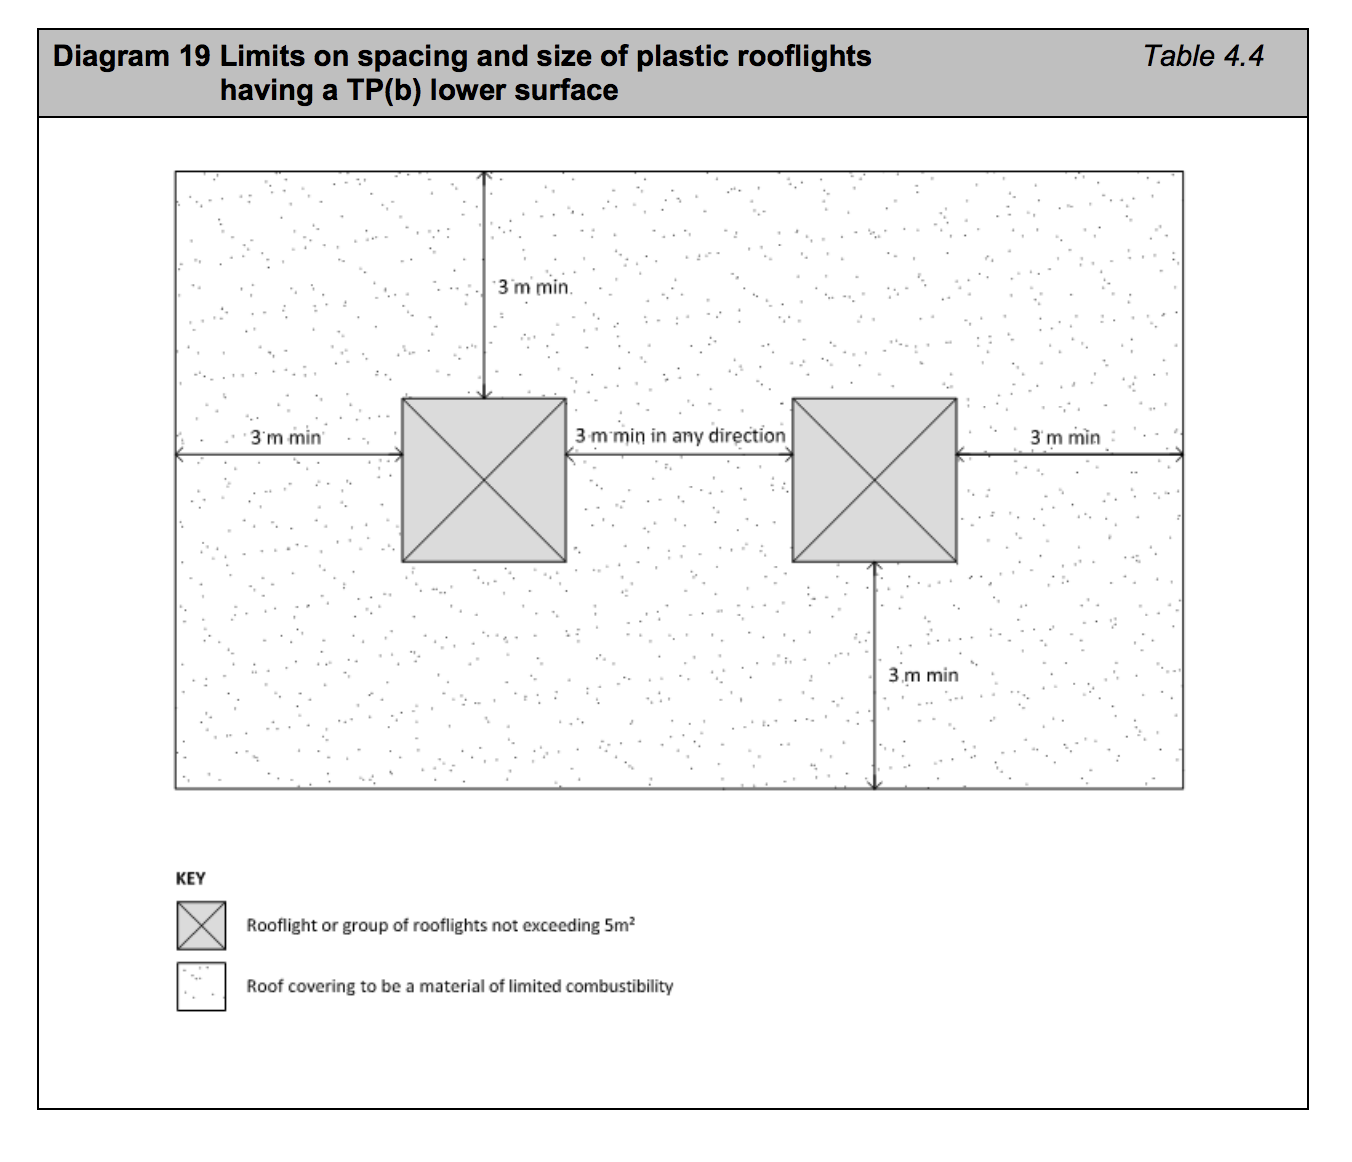 Diagram HB19 - Limits on spacing and size of plastic rooflights having a TP(b) lower surface - Extract from TGD B Vol. 2